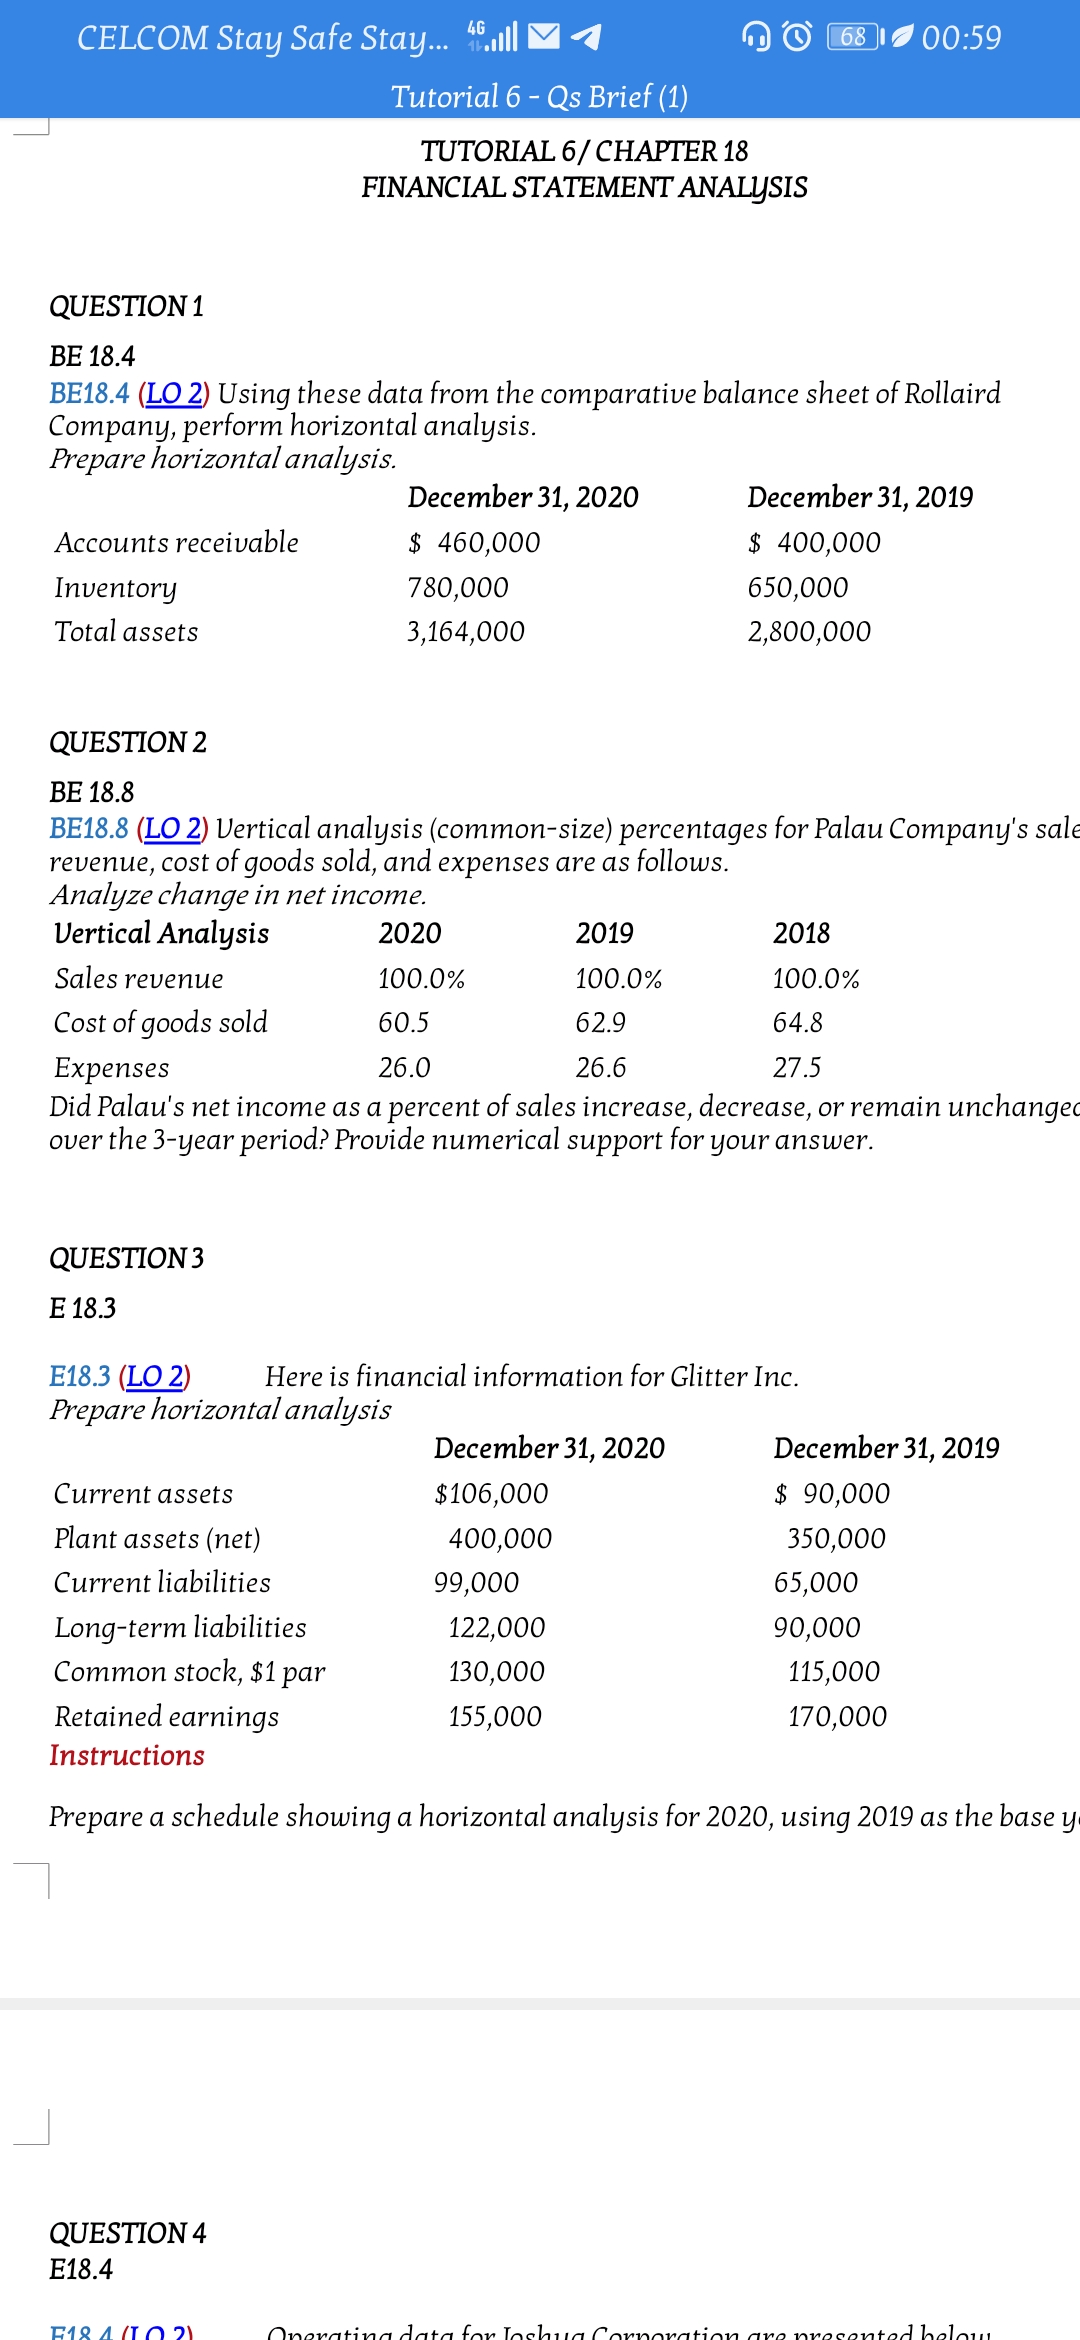 CELCOM Stay Safe Stay. .l
4G
68
00:59
Tutorial 6 - Qs Brief (1)
TUTORIAL 6/ CHAPTER 18
FINANCIAL STATEMENT ANALYSIS
QUESTION 1
BE 18.4
BE18.4 (LO 2) Using these data from the comparative balance sheet of Rollaird
Company, perform horizontal analysis.
Prepare horizontal analysis.
December 31, 2020
December 31, 2019
Accounts receivable
$ 460,000
$ 400,000
Inventory
780,000
650,000
Total assets
3,164,000
2,800,000
QUESTION 2
ВЕ 18.8
BE18.8 (LO 2) Vertical analysis (common-size) percentages for Palau Company's sale
revenue, cost of goods sold, and expenses are as follows.
Analyze change in net income.
Vertical Analysis
2020
2019
2018
Sales revenue
100.0%
100.0%
100.0%
Cost of goods sold
60.5
62.9
64.8
Expenses
Did Palau's net income as a percent of sales increase, decrease, or remain unchanged
over the 3-year period? Provide numerical support for your answer.
26.0
26.6
27.5
QUESTION 3
Е 18.3
E18.3 (LO 2)
Prepare horizontal analysis
Here is financial information for Glitter Inc.
December 31, 2020
December 31, 2019
Current assets
$106,000
$ 90,000
Plant assets (net)
400,000
350,000
Current liabilities
99,000
65,000
Long-term liabilities
Common stock, $1
122,000
90,000
par
130,000
115,000
Retained earnings
155,000
170,000
Instructions
Prepare a schedule showing a horizontal analysis for 2020, using 2019 as the base y
QUESTION 4
E18.4
E18 4 (I O 2)
Oneratina data for Joshua Cornoration gre presented belou
